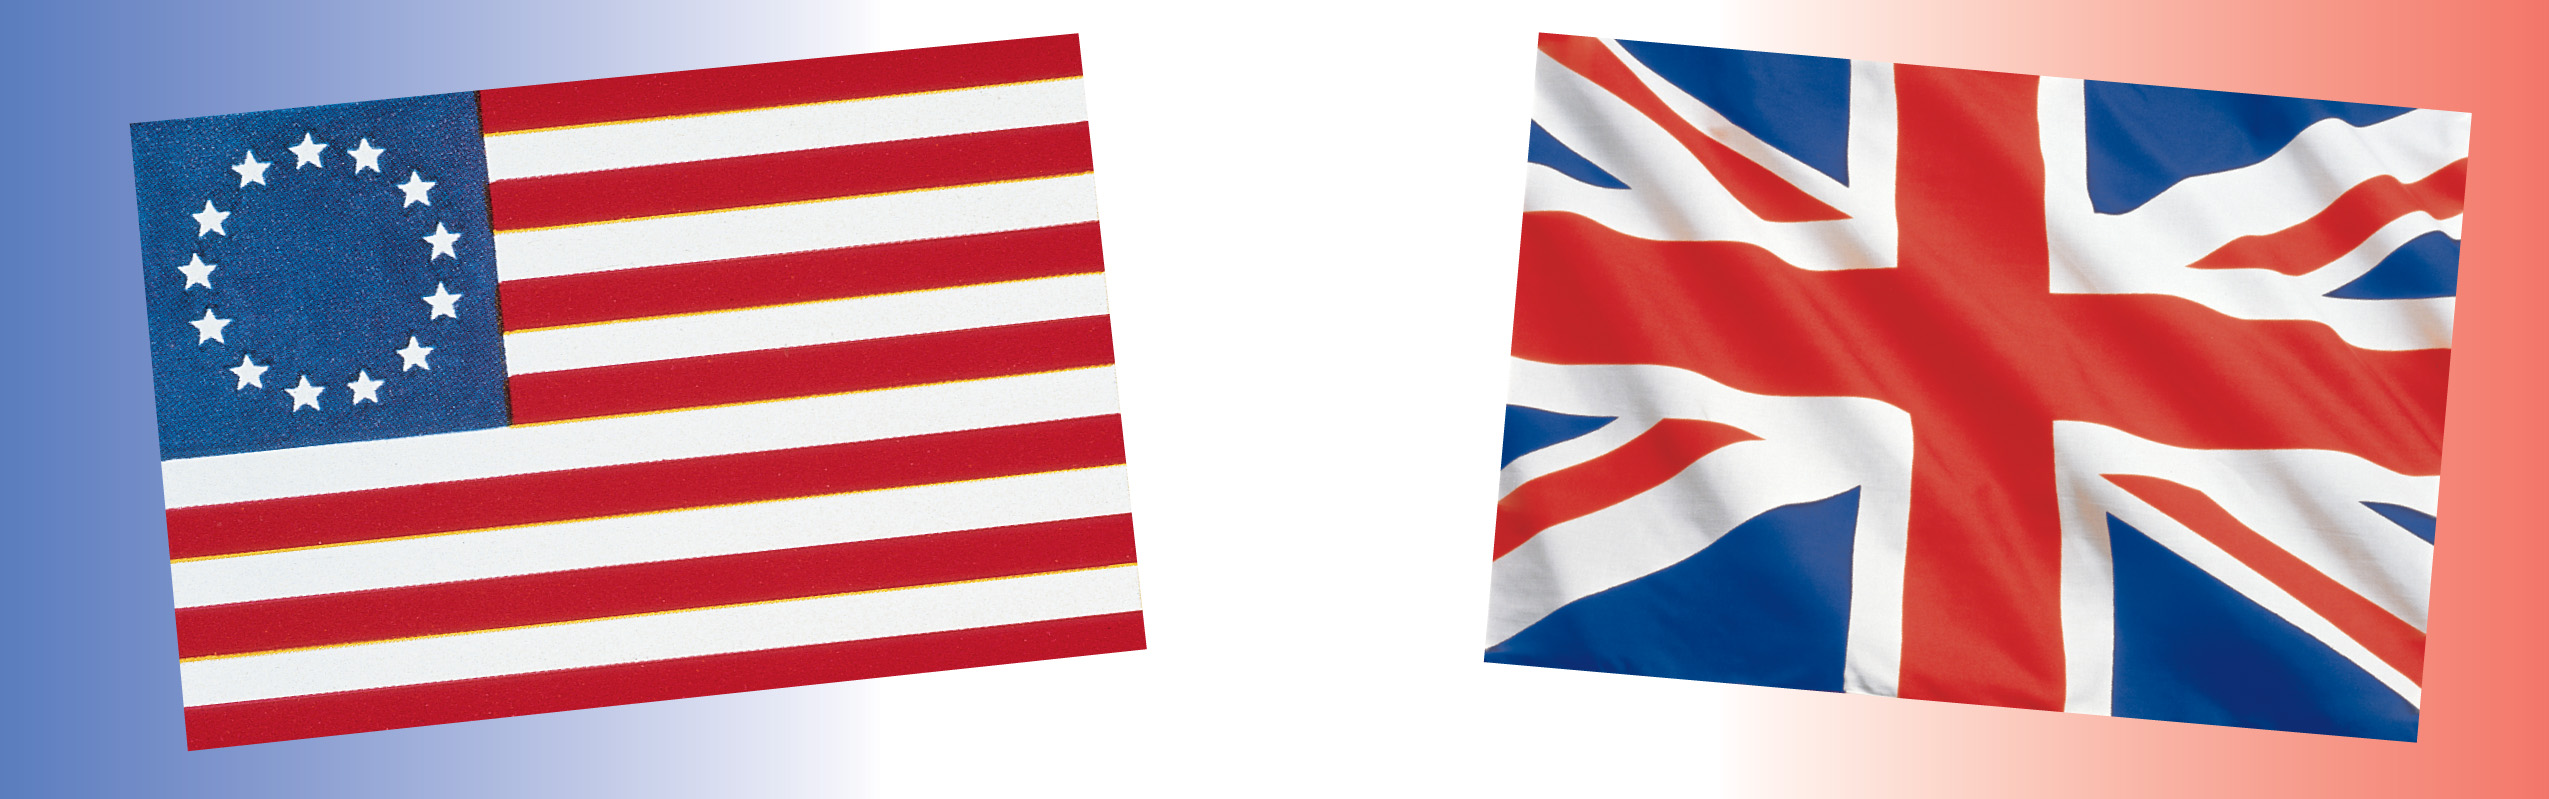 An early american flag with red and white stripes and 13 white stars in a circle, beside a British Union Jack flag.